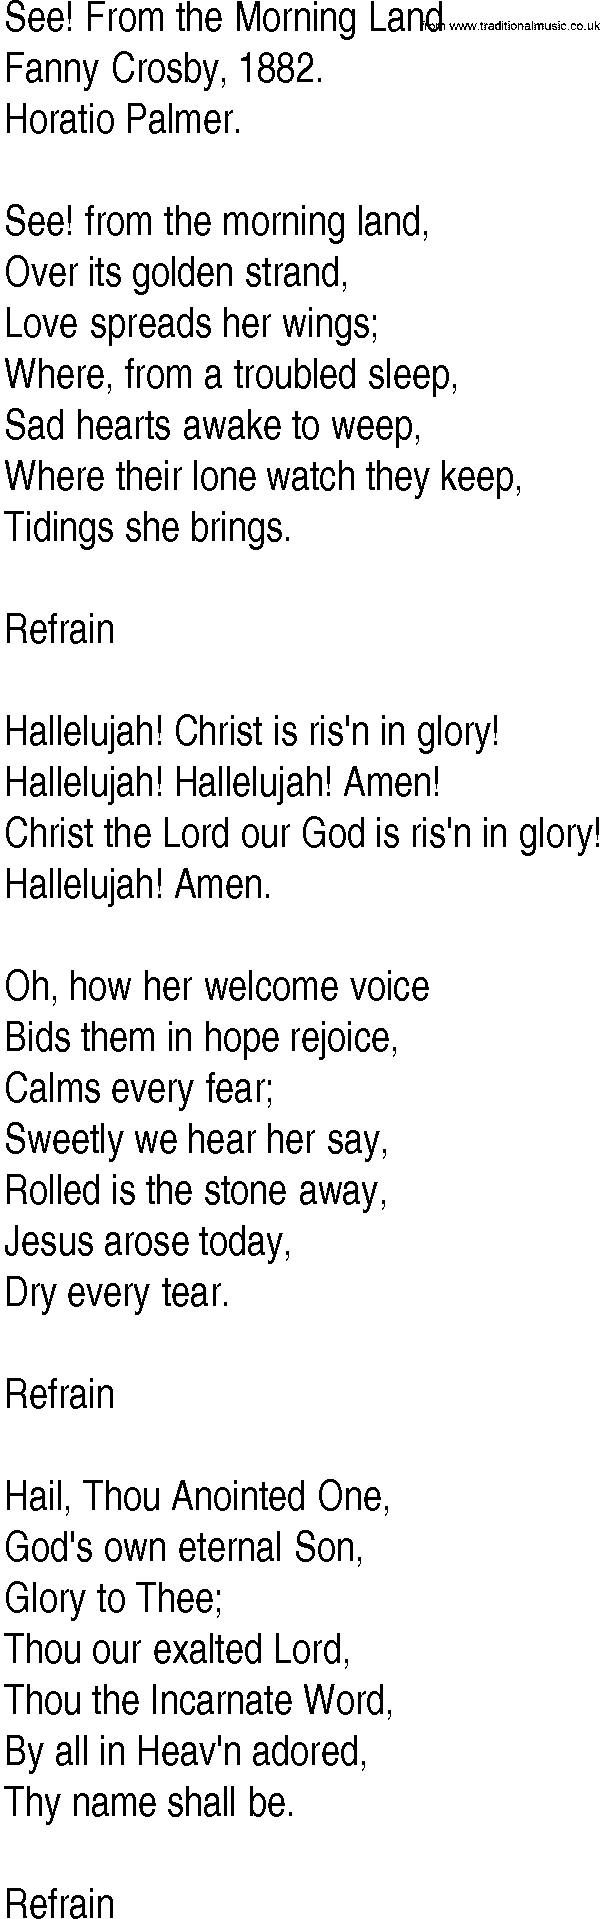 Hymn and Gospel Song: See! From the Morning Land by Fanny Crosby lyrics